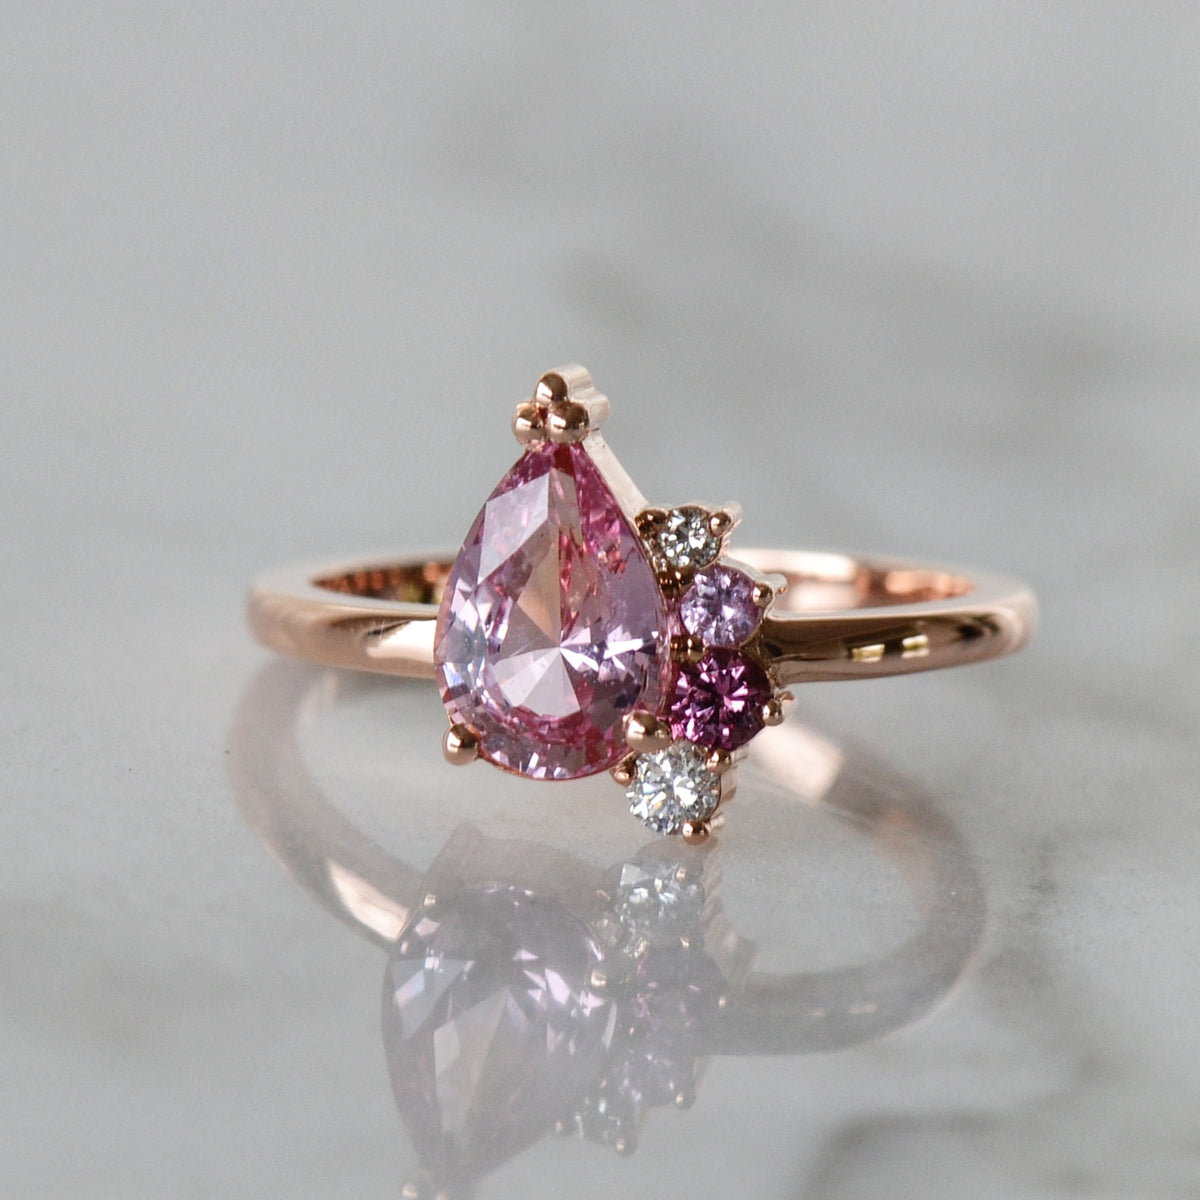 A stunning Rose Gold Pear Cut Engagement Ring placed on the shiny surface..